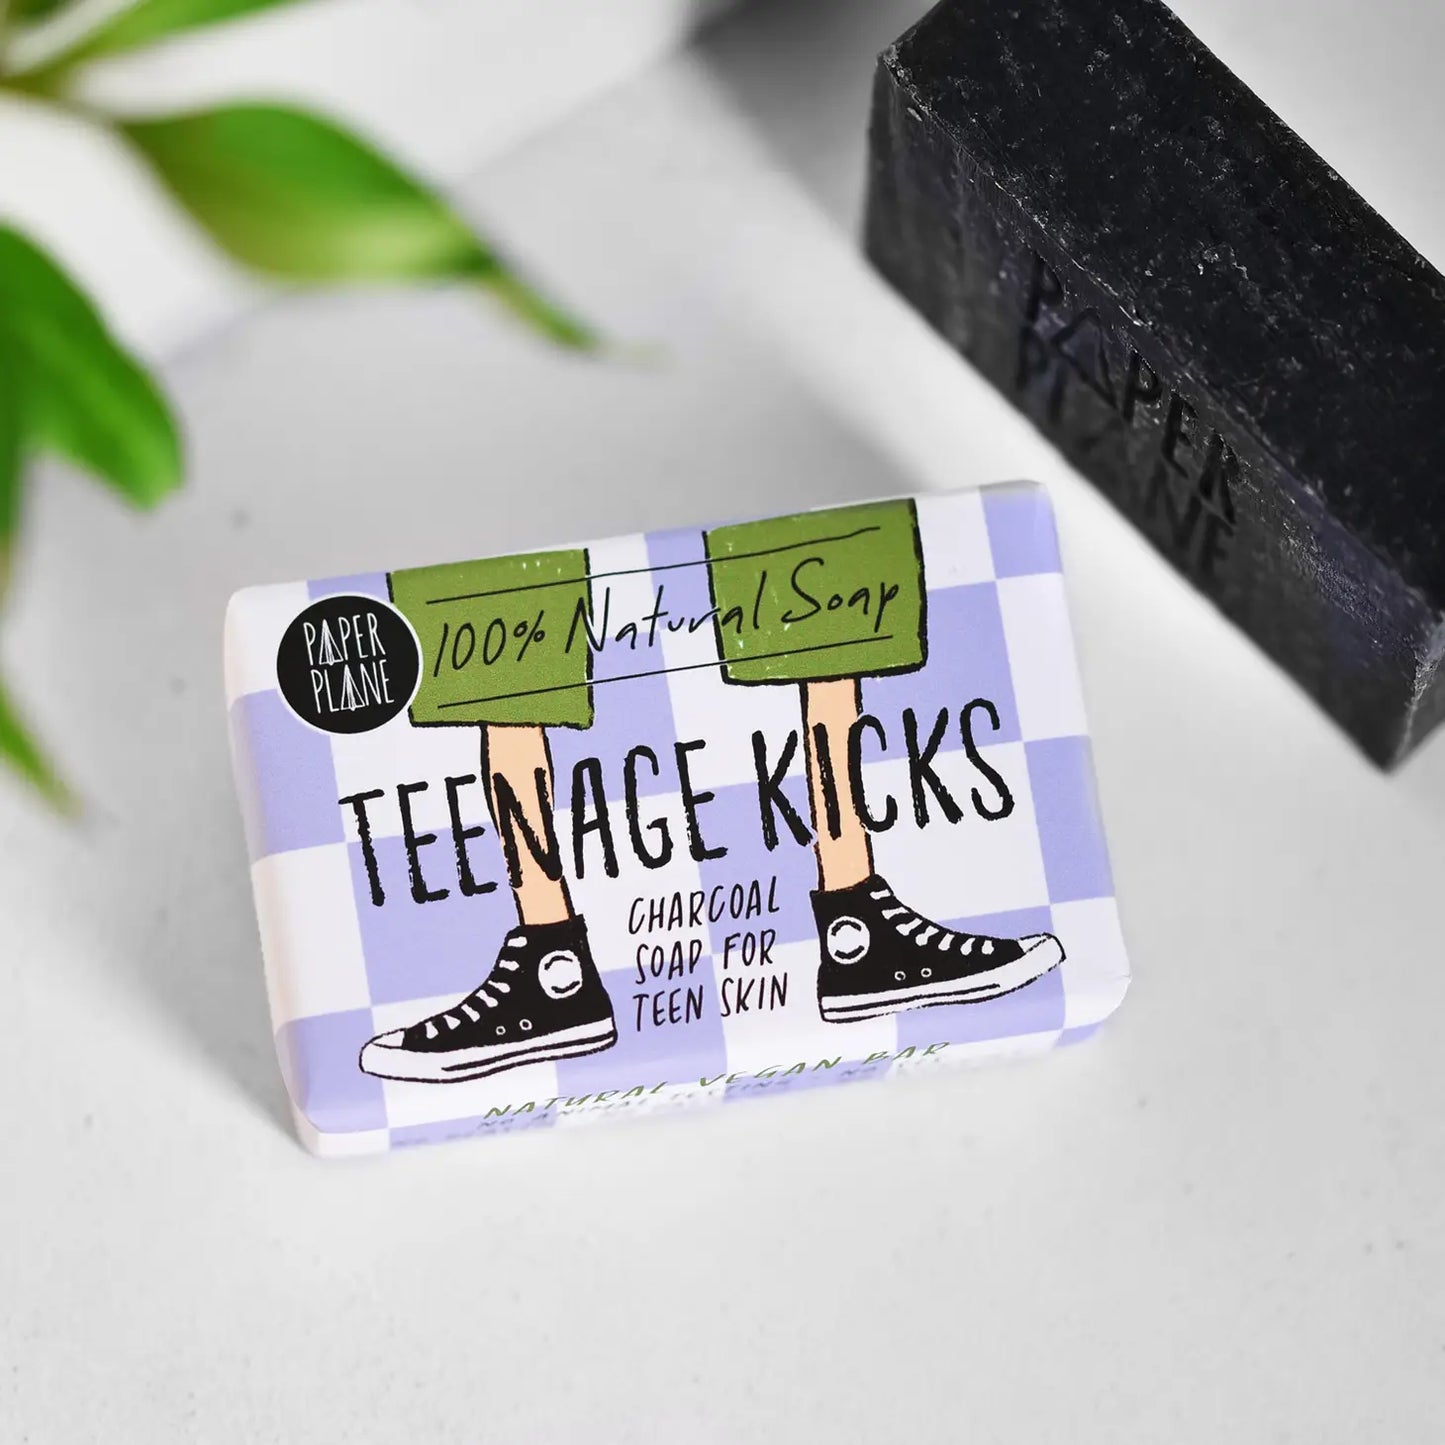 Gifts for teenagers , gift box for teens , stocking fillers for teenagers.